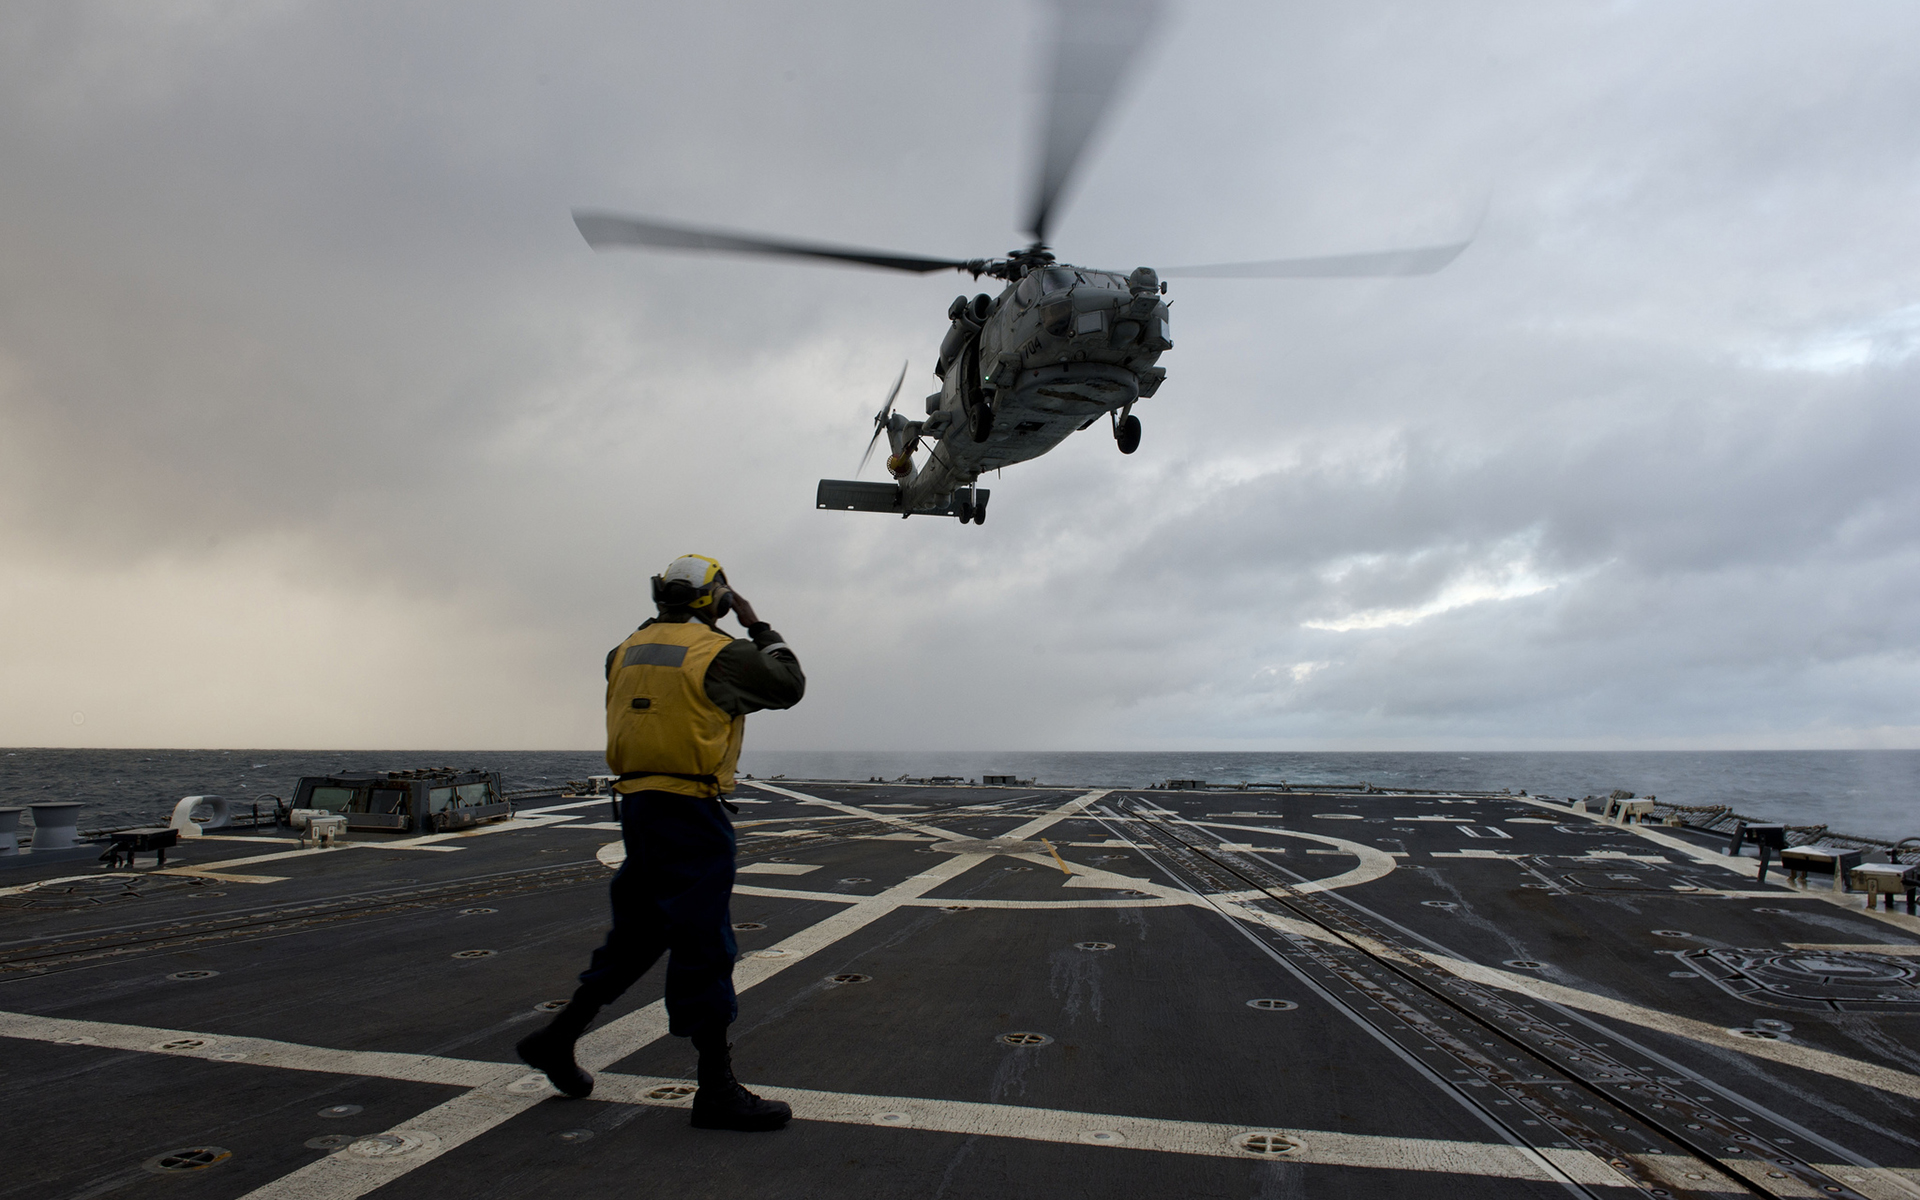 helicopter, Soldier, Military, Aircraft, Carrier, Ship, Sky, Clouds, Ocean, Sea Wallpaper